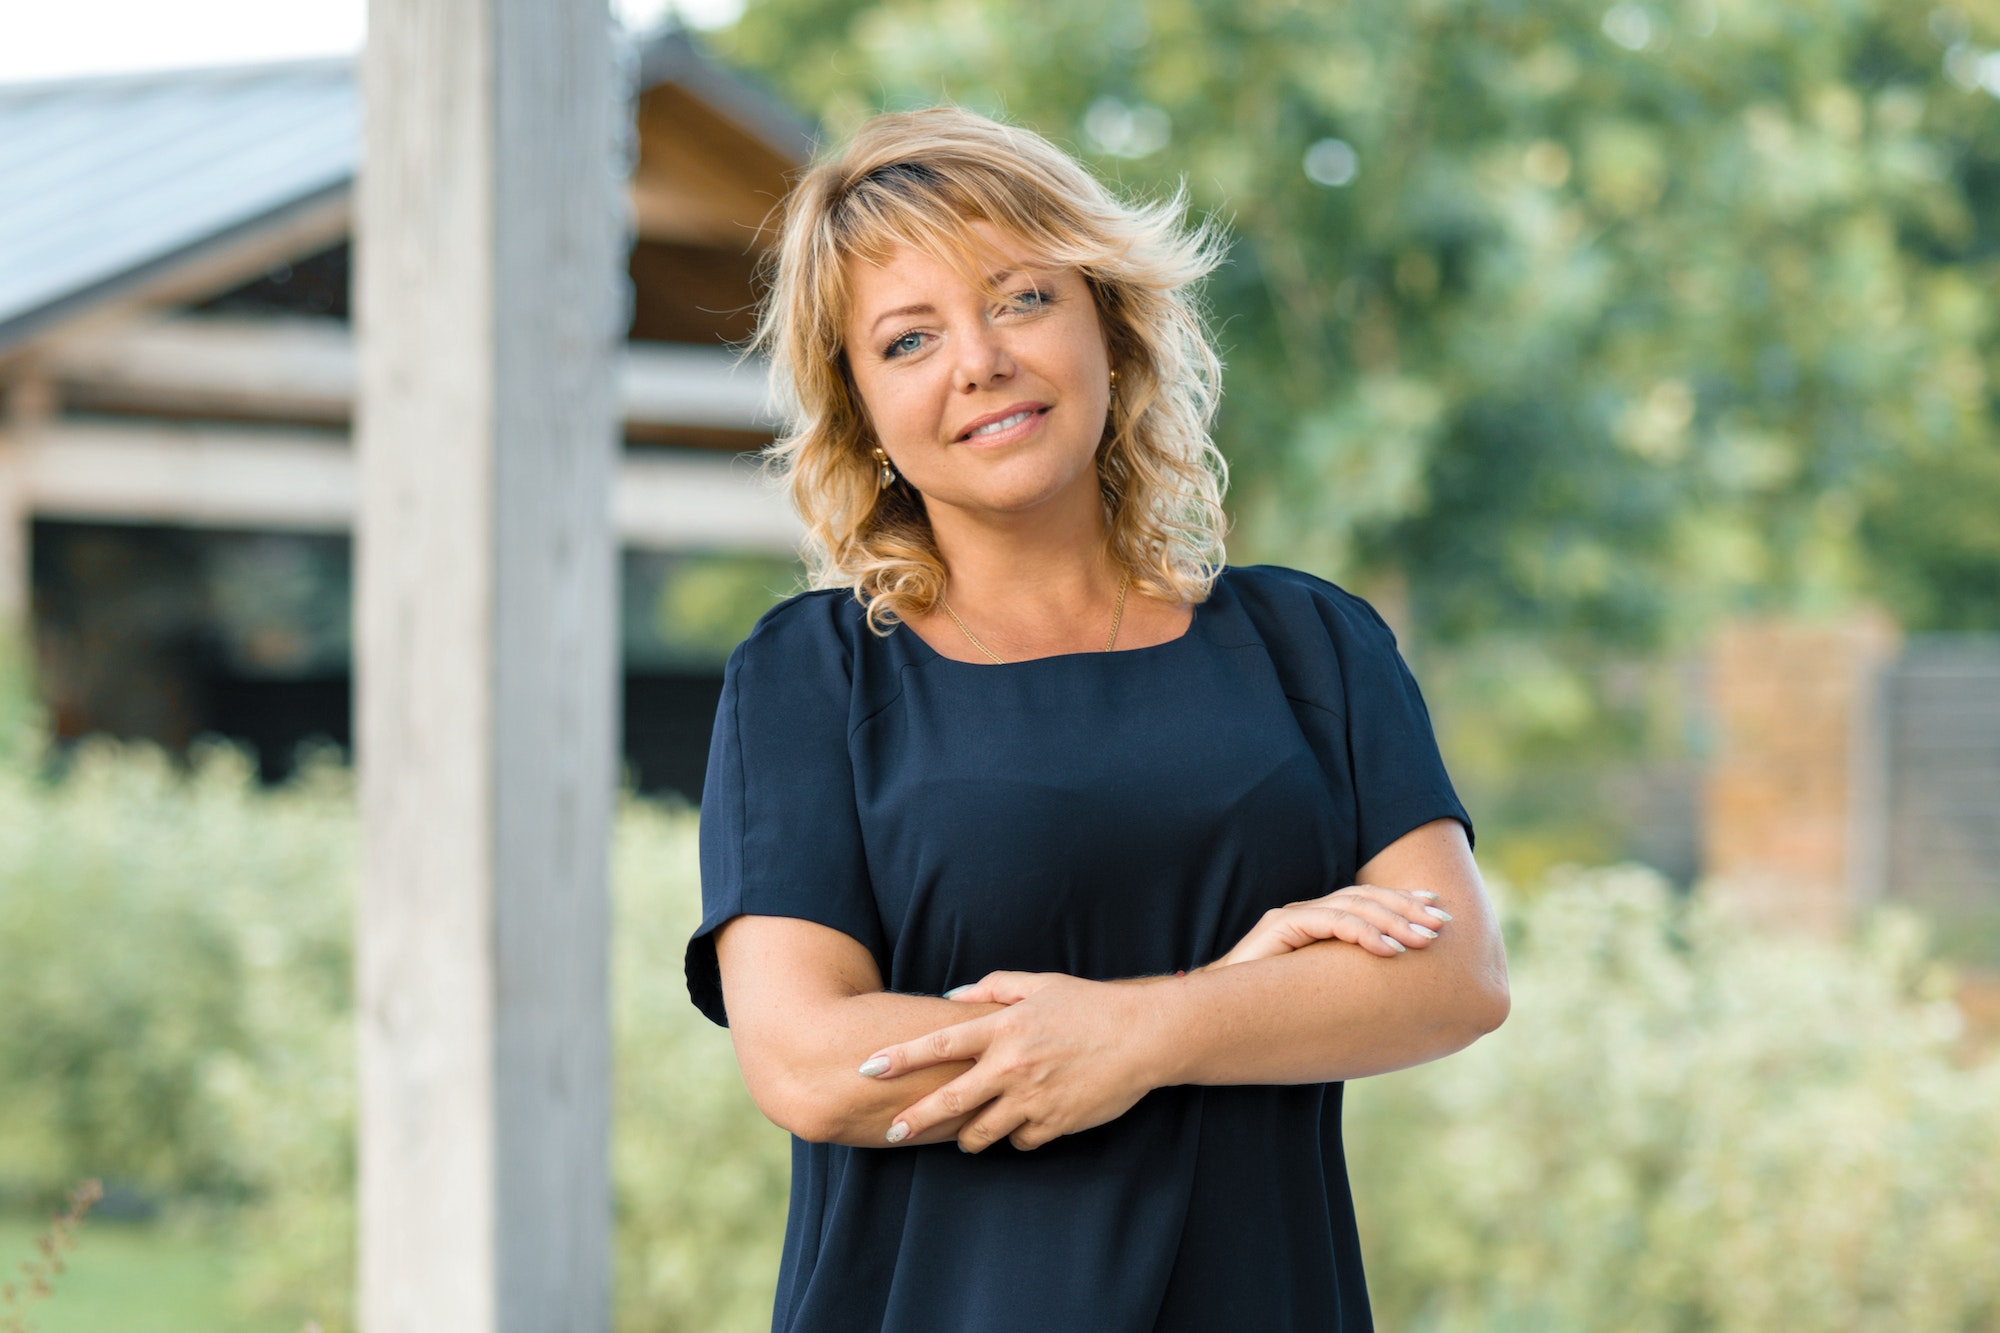 Outdoor portrait of positive successful mature middle-aged woman